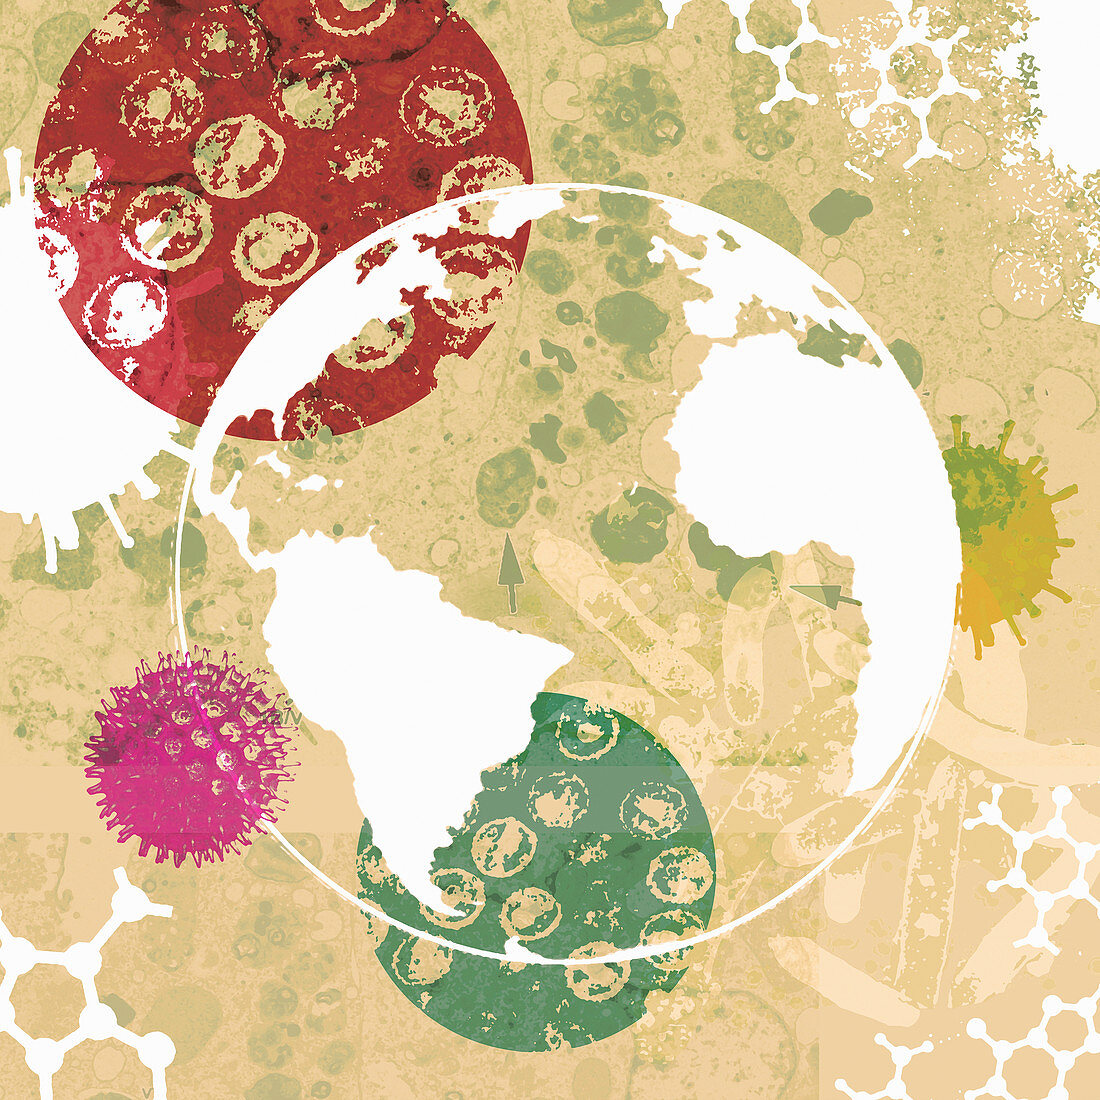 Globe surrounded by bacteria and viruses, illustration